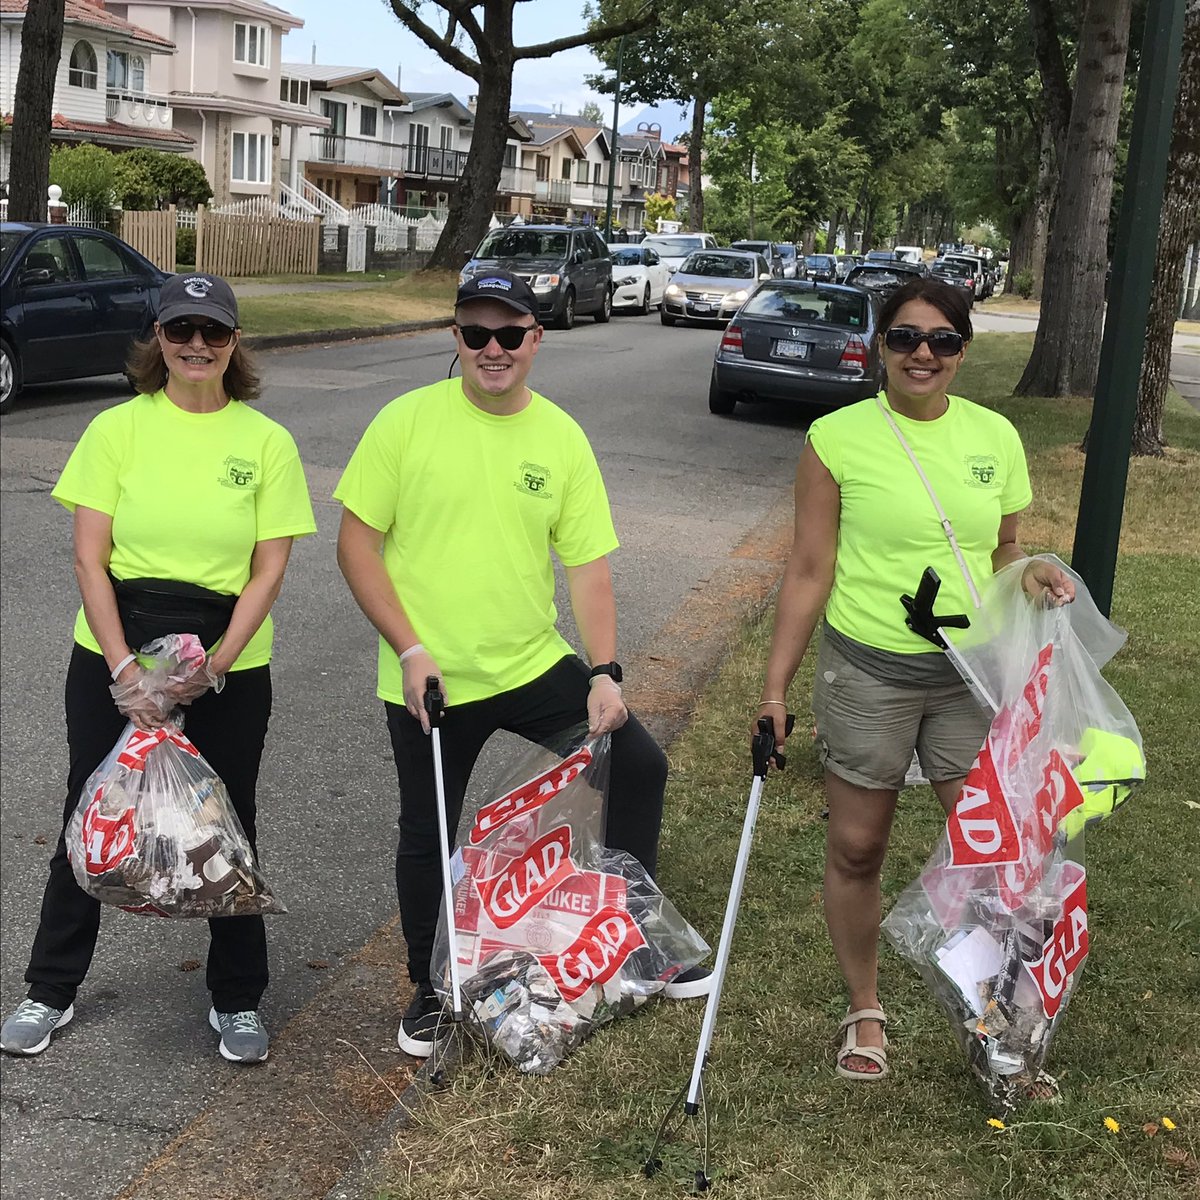 It was a busy Saturday in #SouthVancouver.  Thanks to @VDBIA1 for organizing the #CleanUpParty.  @svcpc had fun working together with  #Community members to #KeepVancouverSpectacular.  @greenestcity @CleanTogether 🍁@MyVancouver @VancouverPD #CommunityPolicing #Volunteers